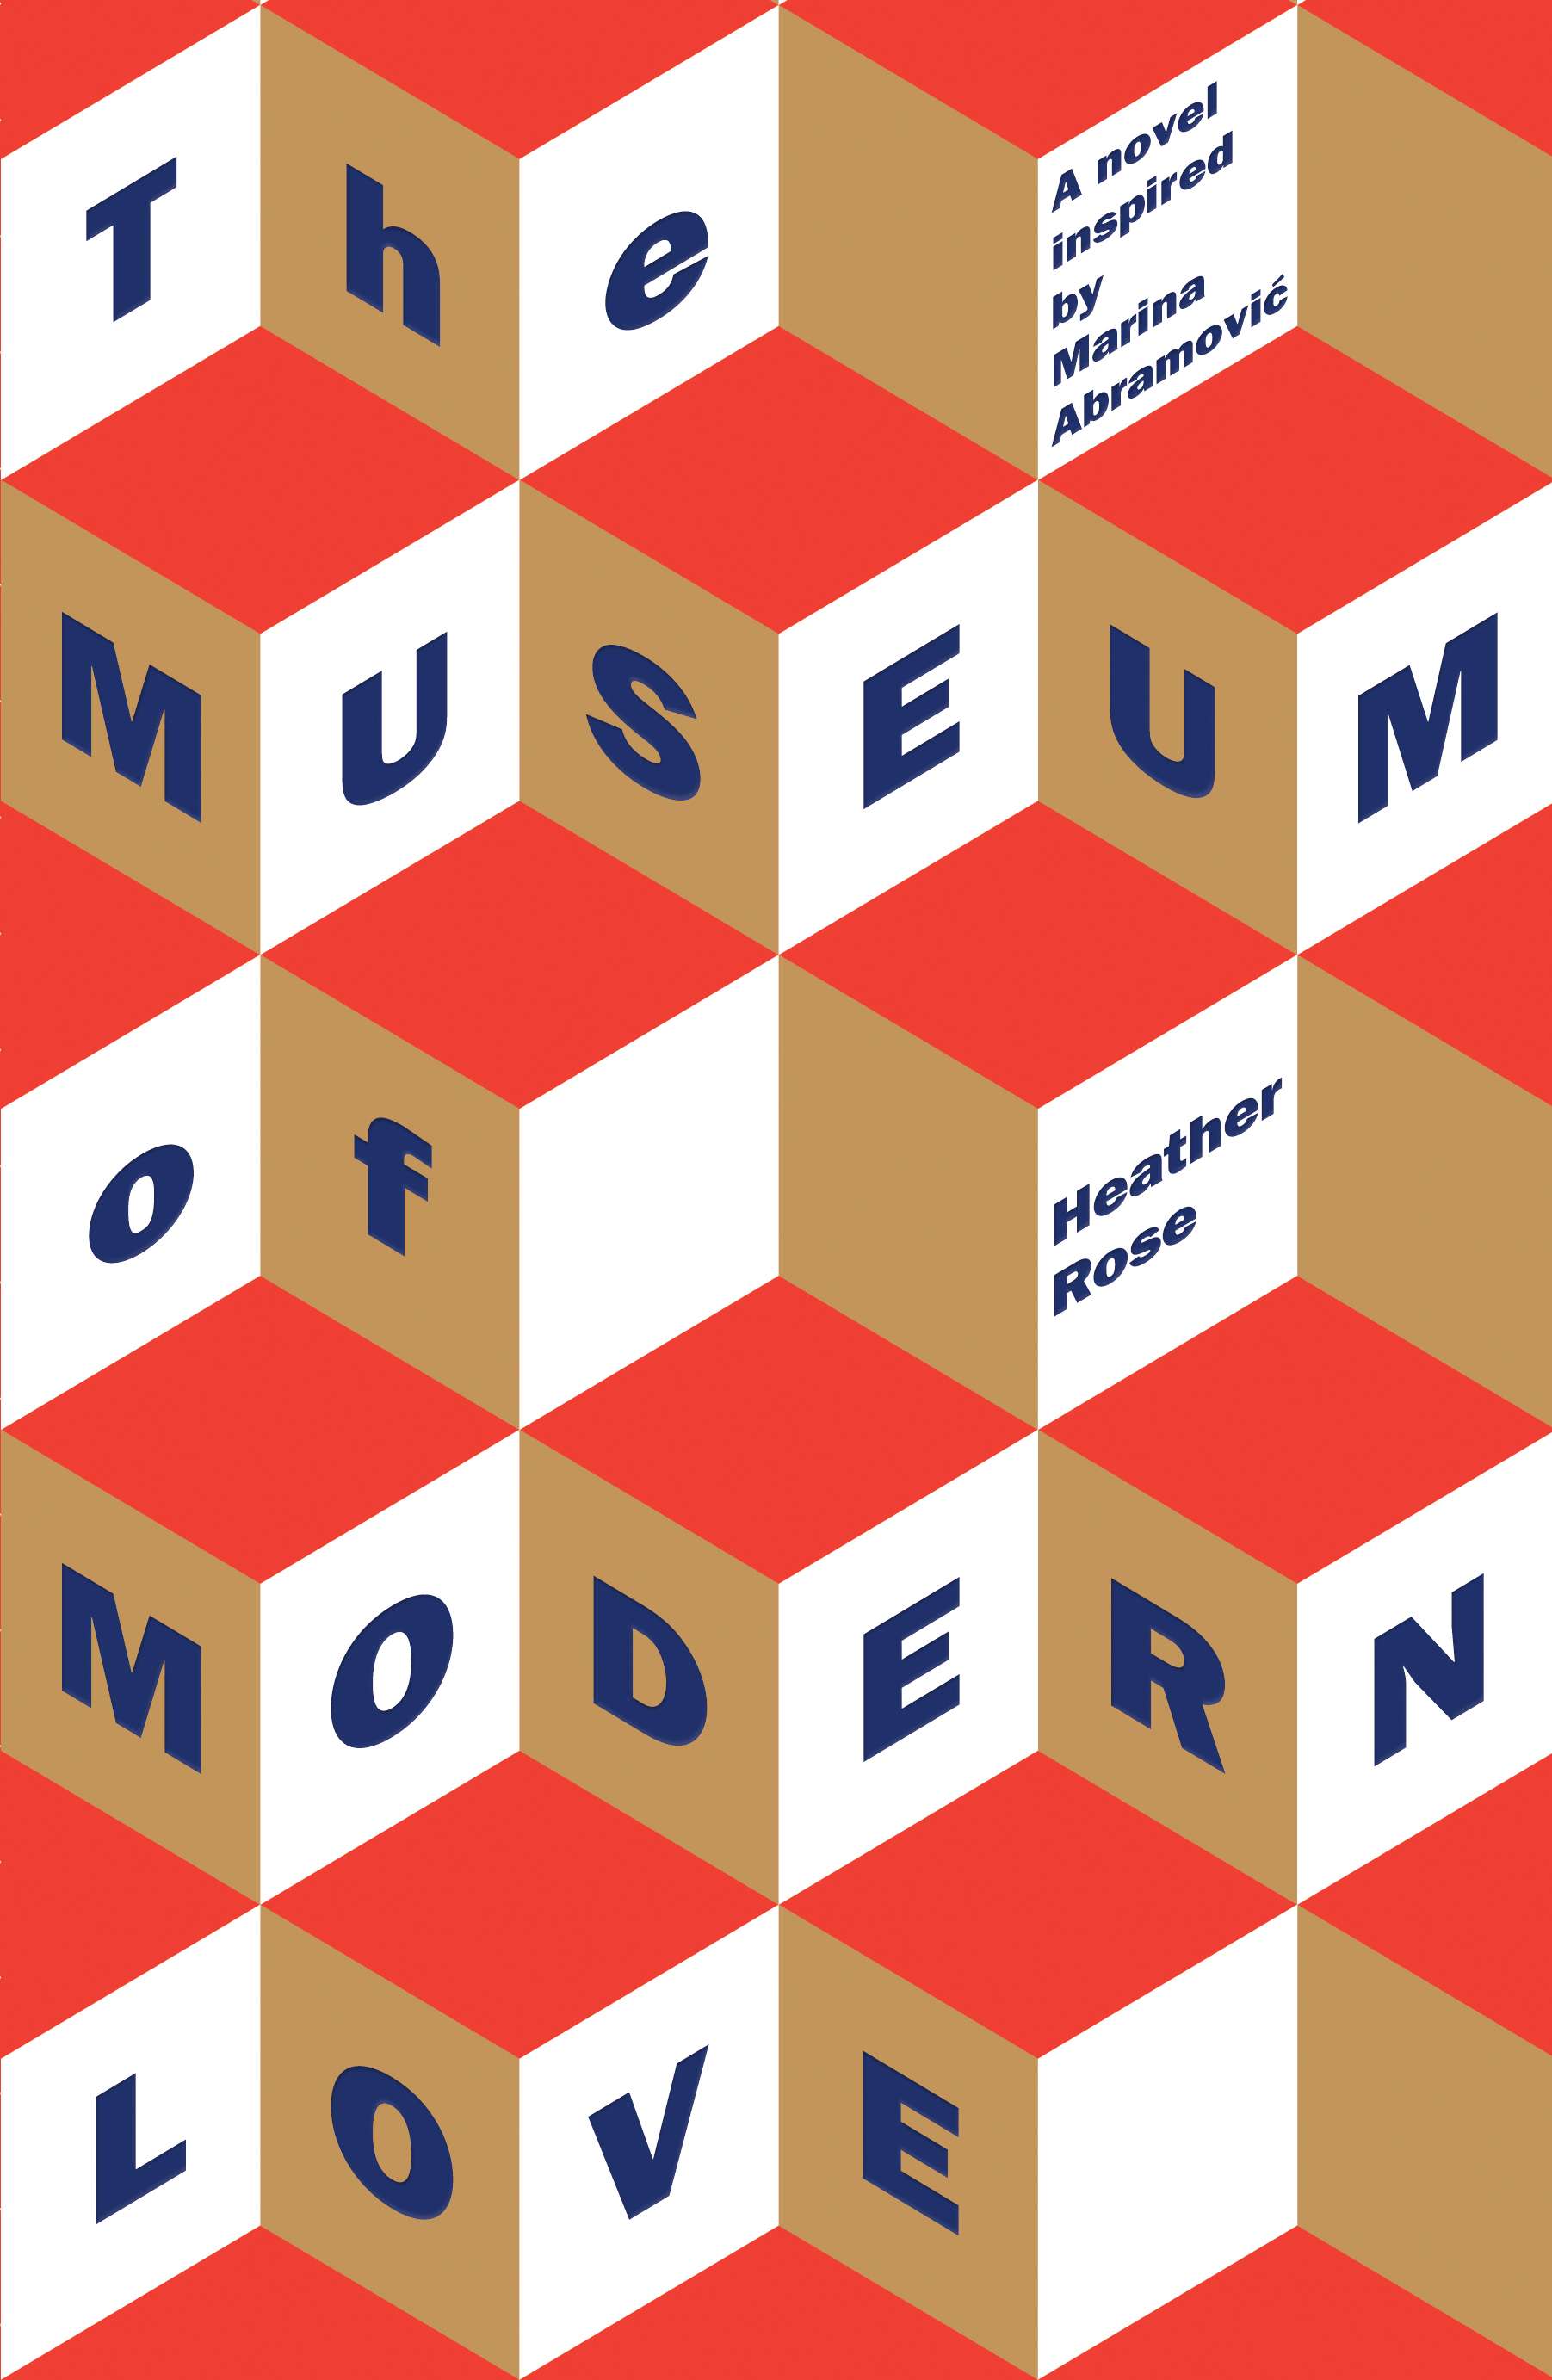 The Museum of Modern Love by Heather Rose book cover featuring a tessellation of cubes